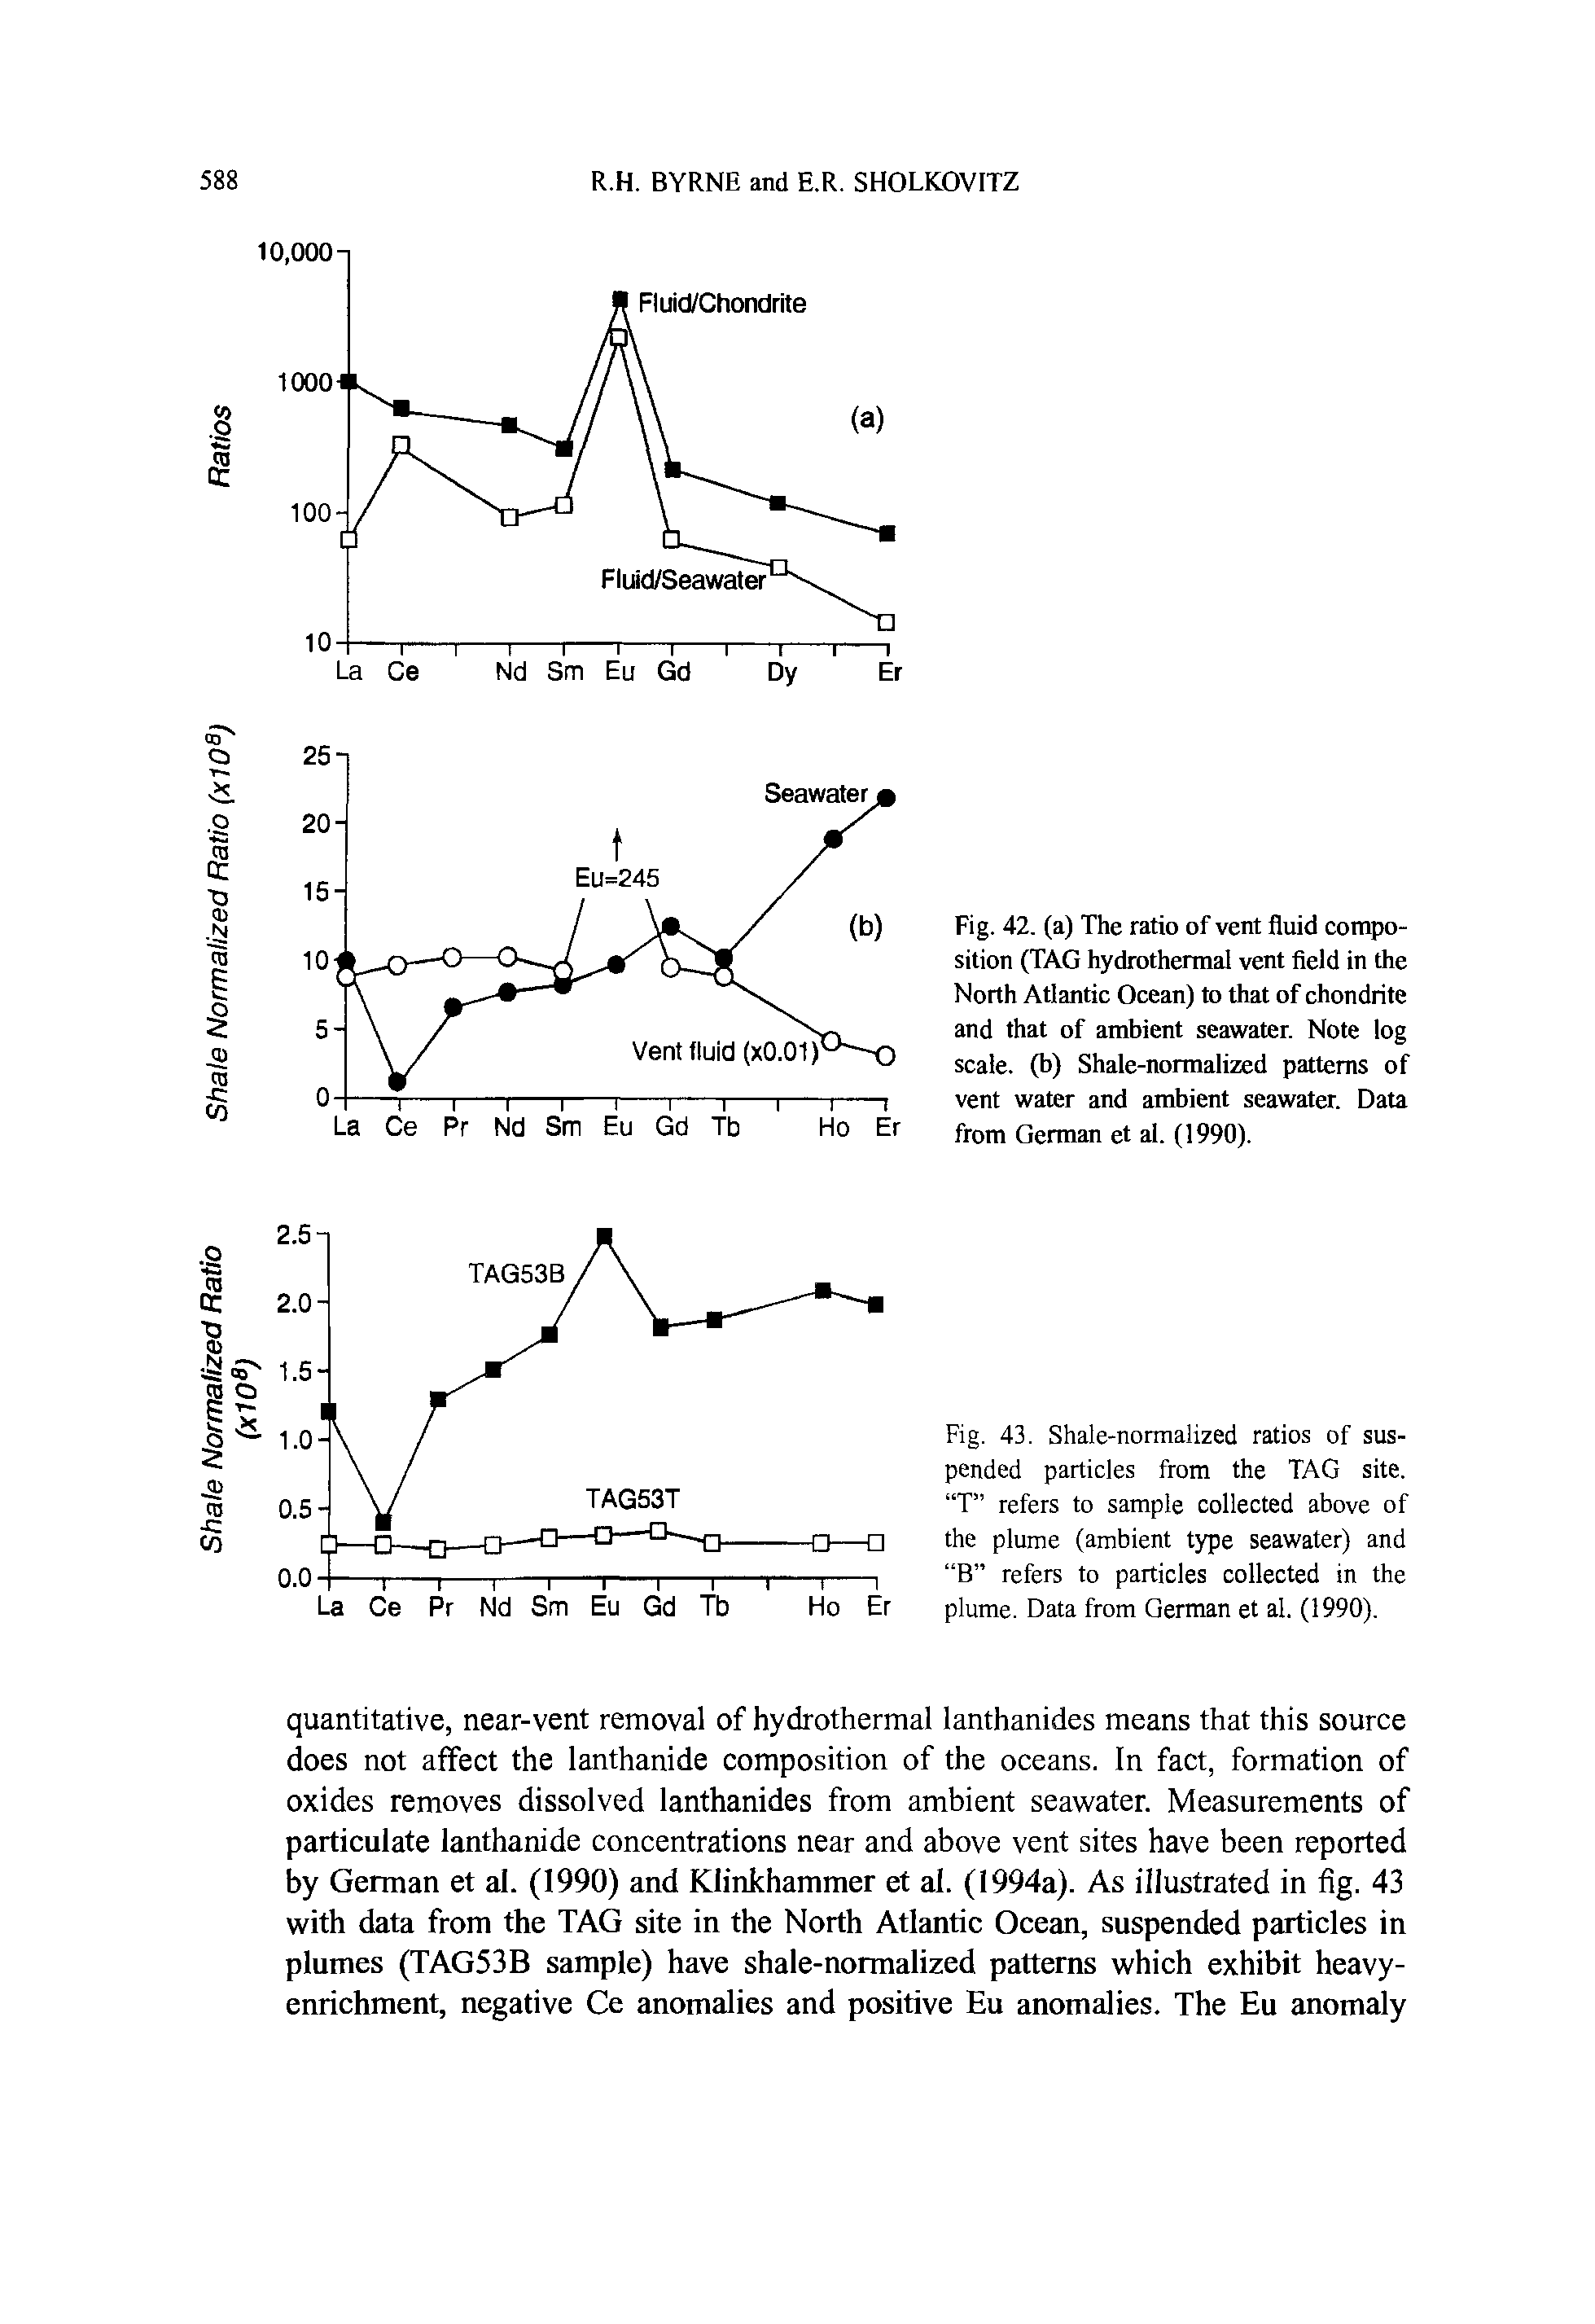 Fig. 43. Shale-normalized ratios of suspended particles from the TAG site. T refers to sample collected above of the plume (ambient type seawater) and B refers to particles collected in the plume. Data from German et al. (1990).